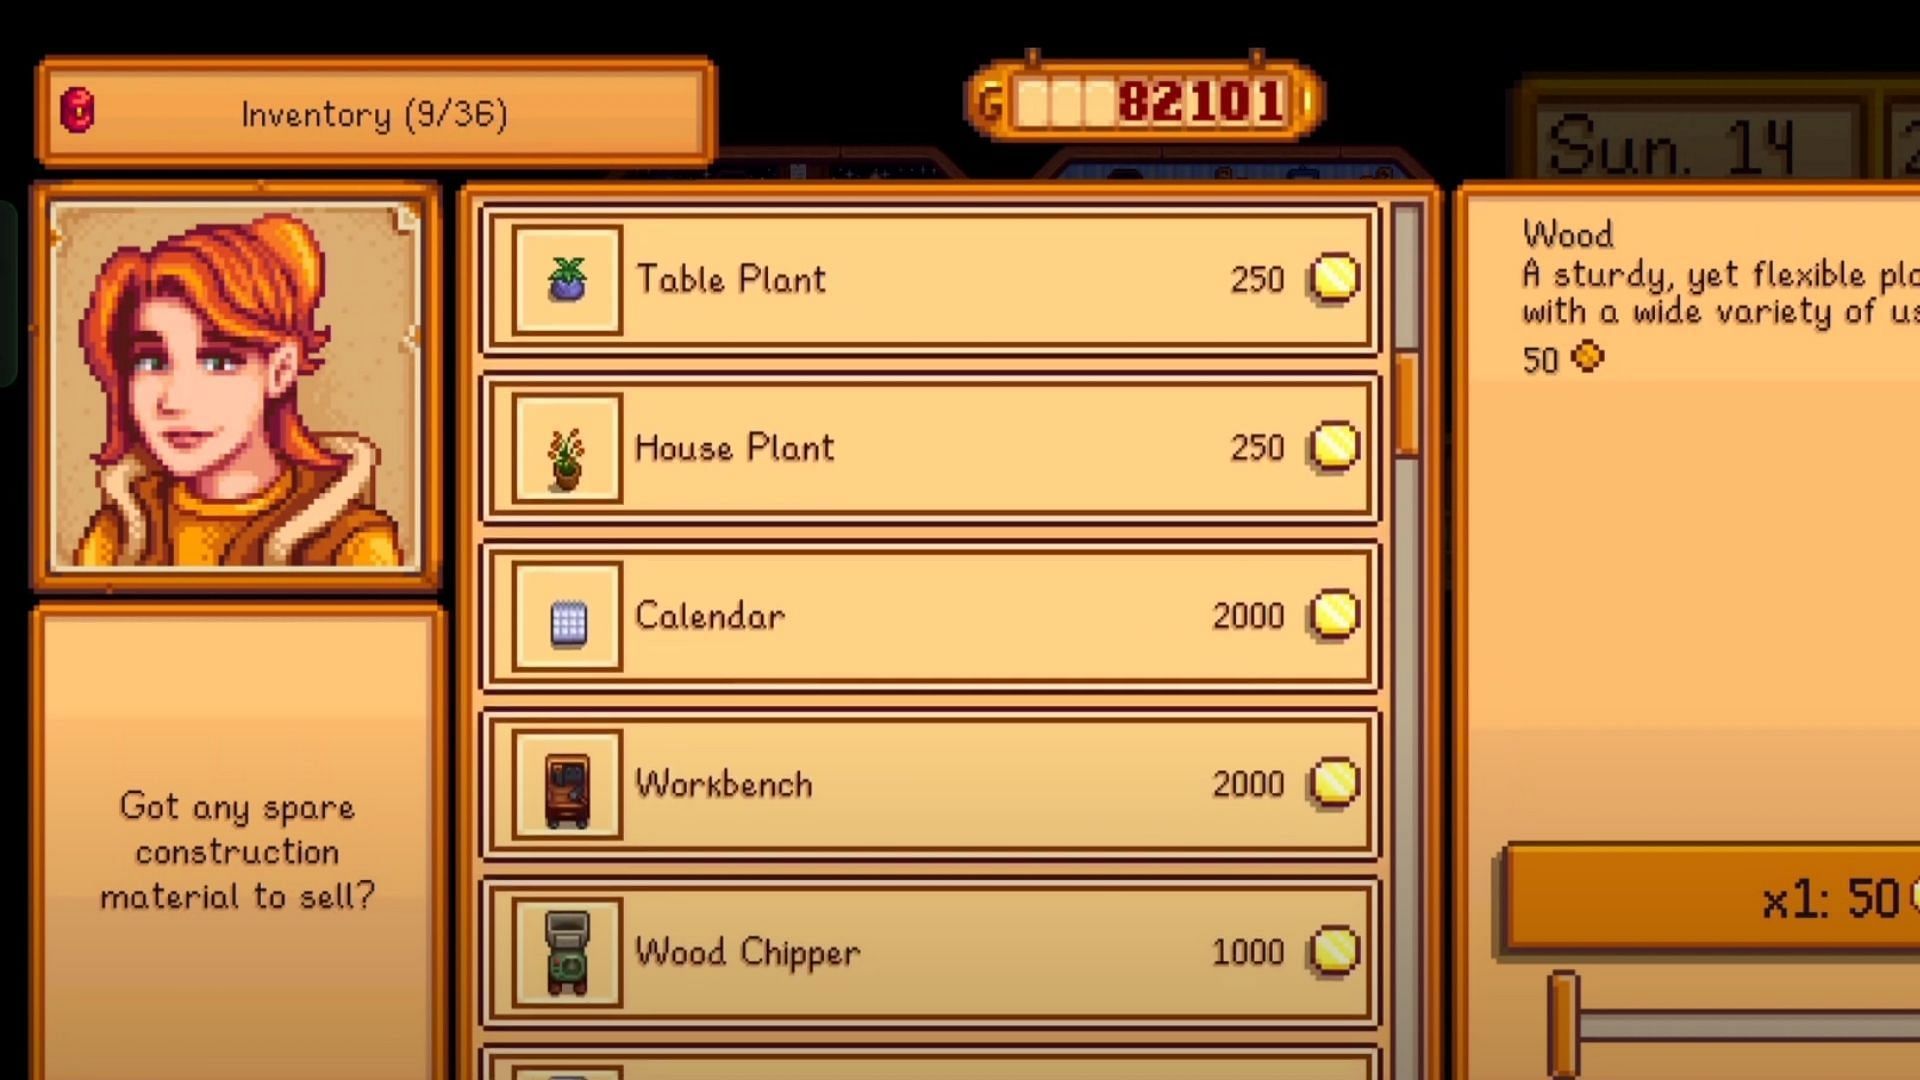 The calendar can be purchased from Robin&#039;s shop for 2000 gold. (Image via ConcernedApe || YouTube/@Infinite Gaming)